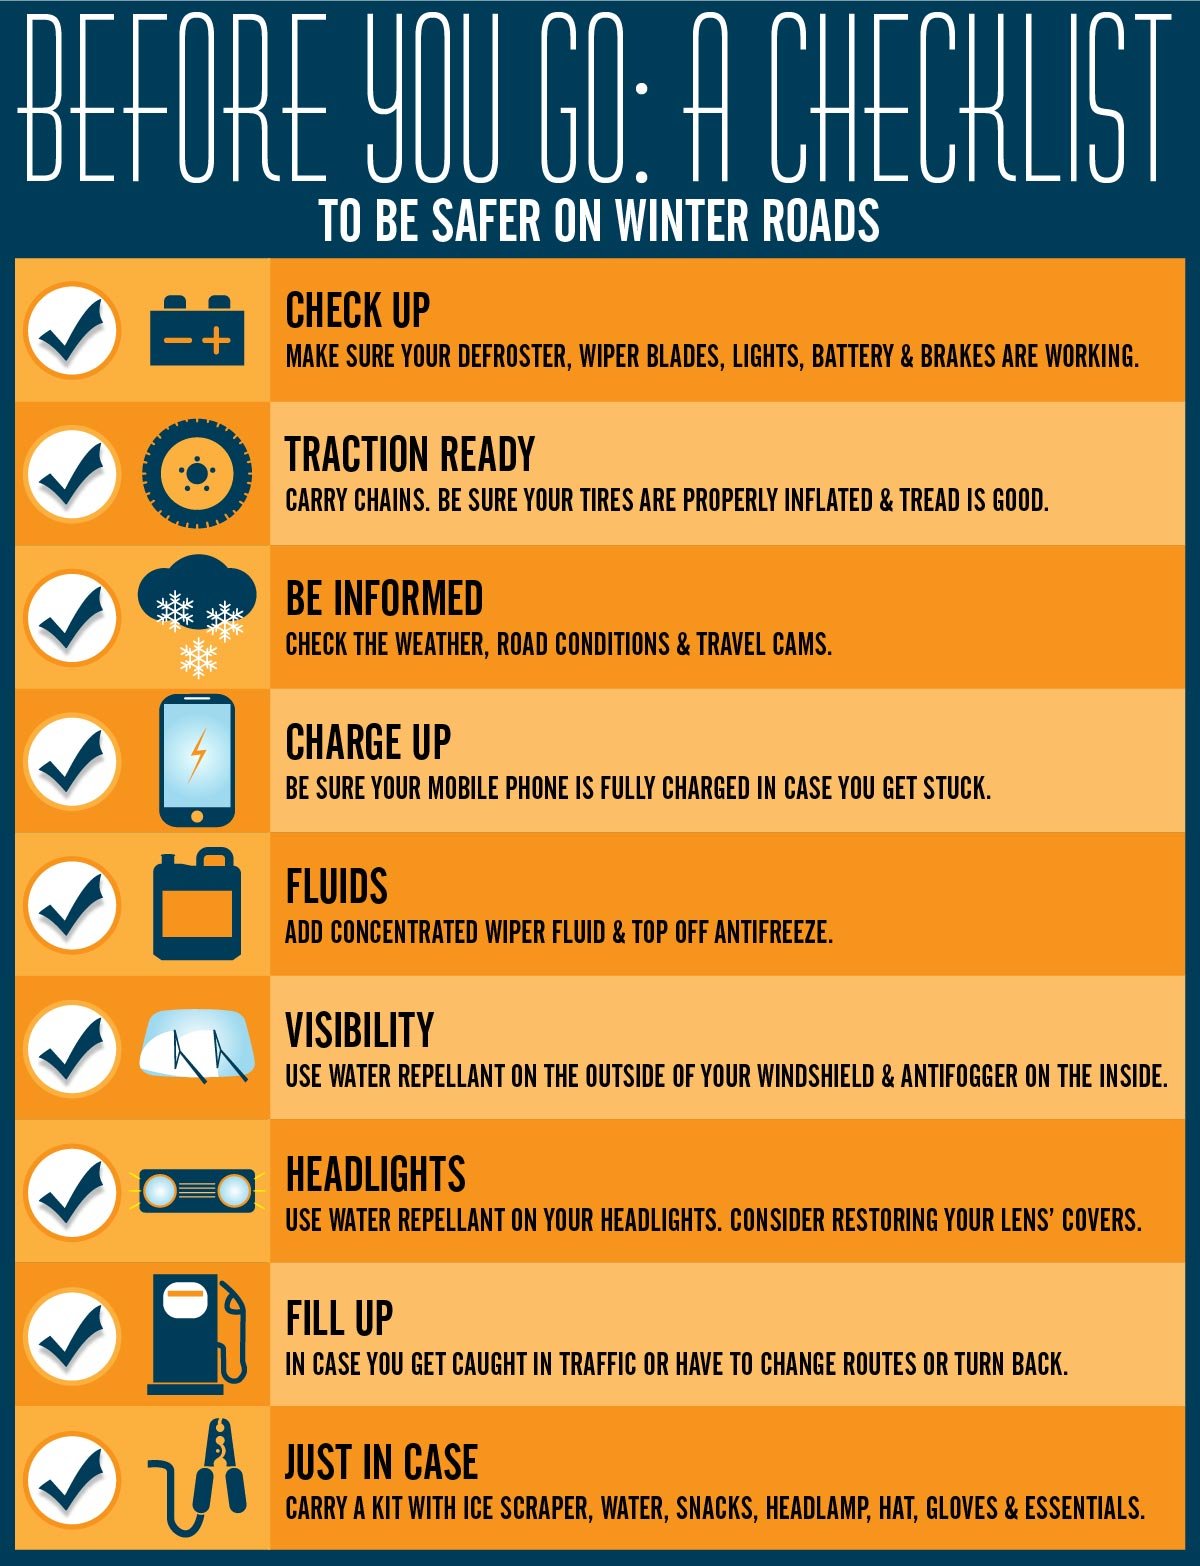 9 Driving Safety Tips To Get You Ready For A Winter Drive Les Schwab